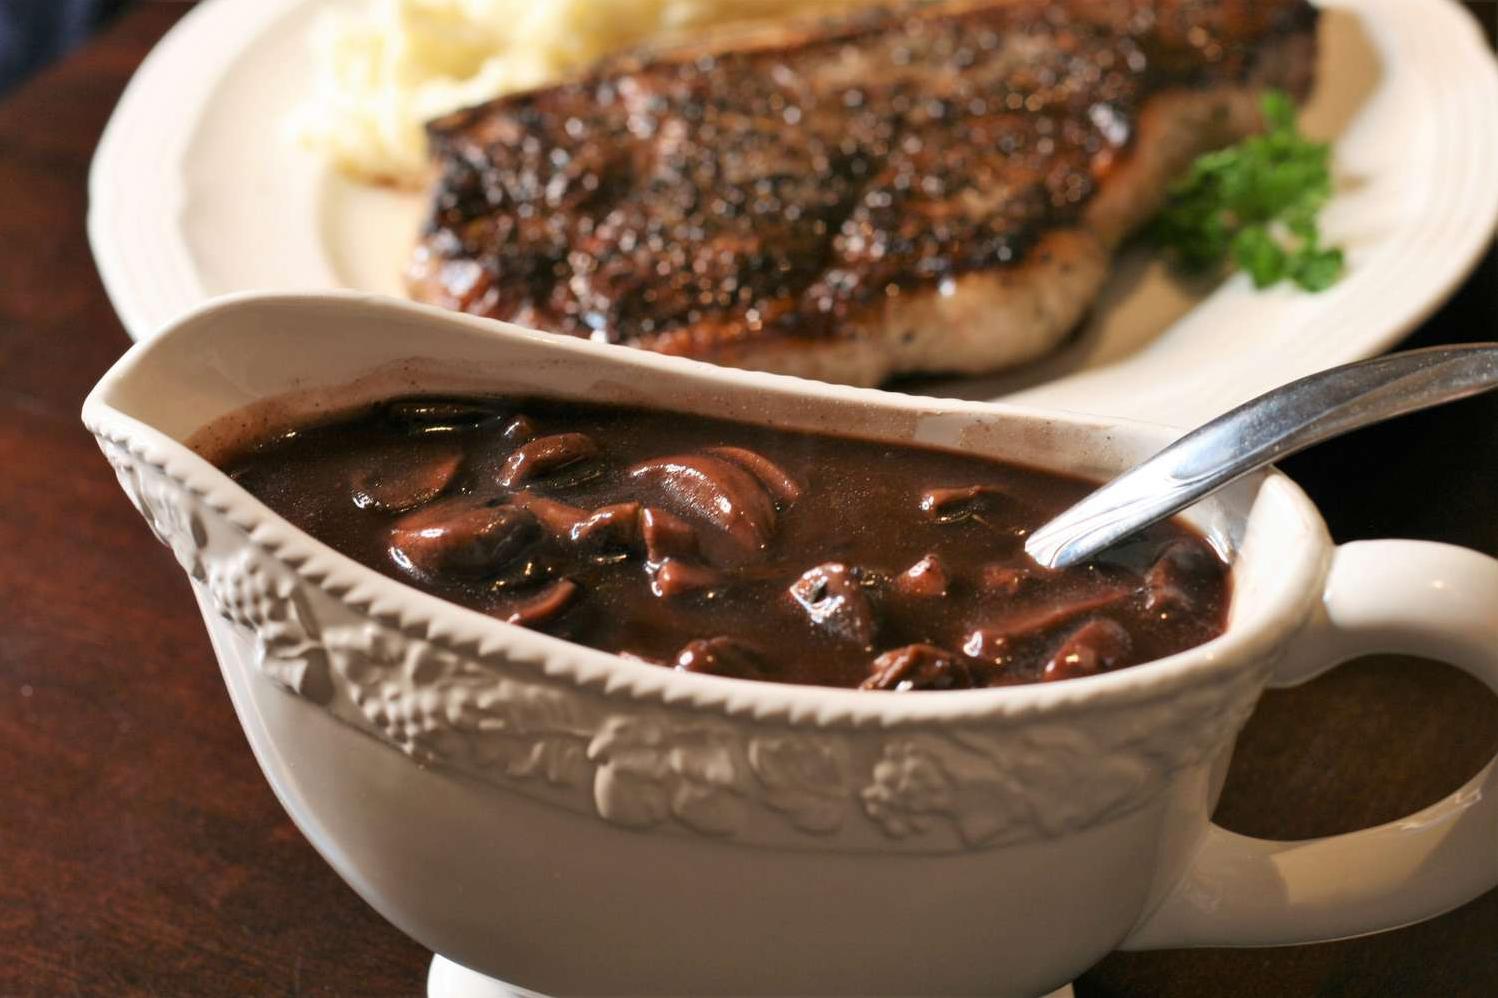  Let the aromas of the steak and sauce fill the air and your senses